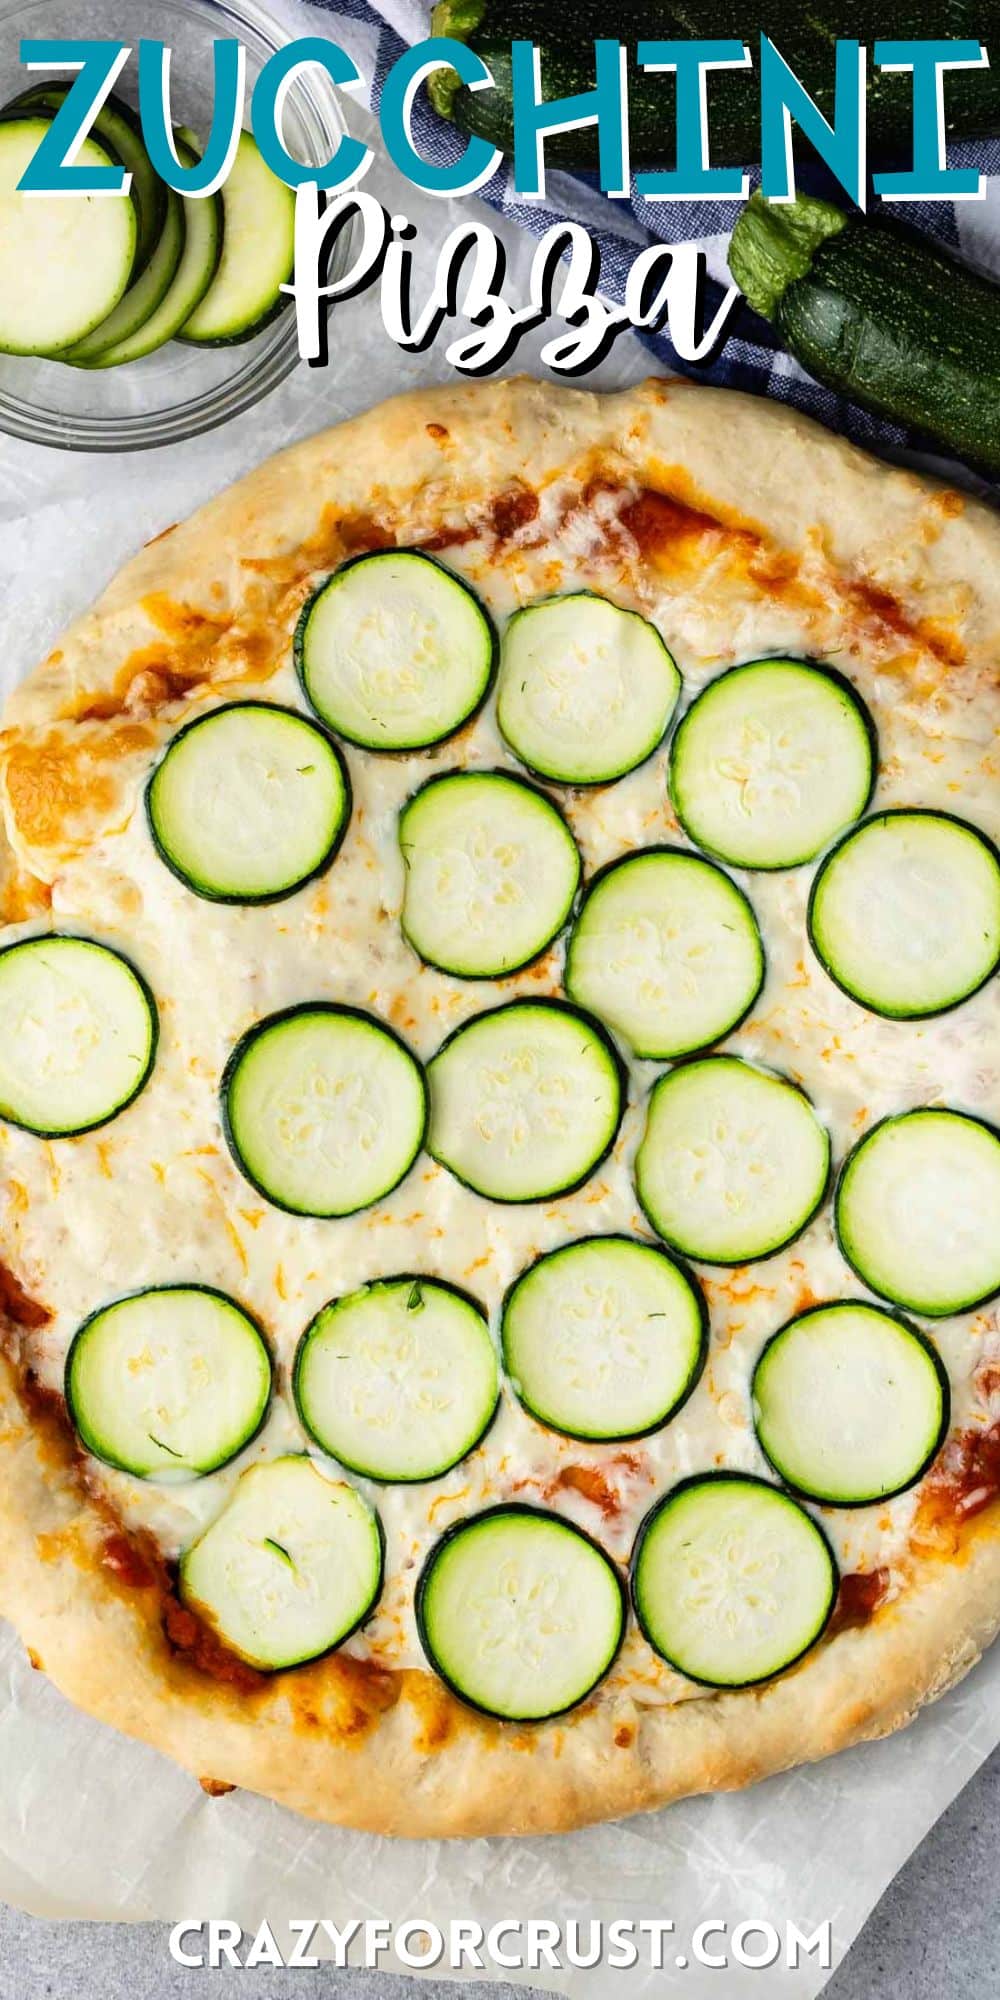 pizza with sliced zucchinis on top with words on the image.